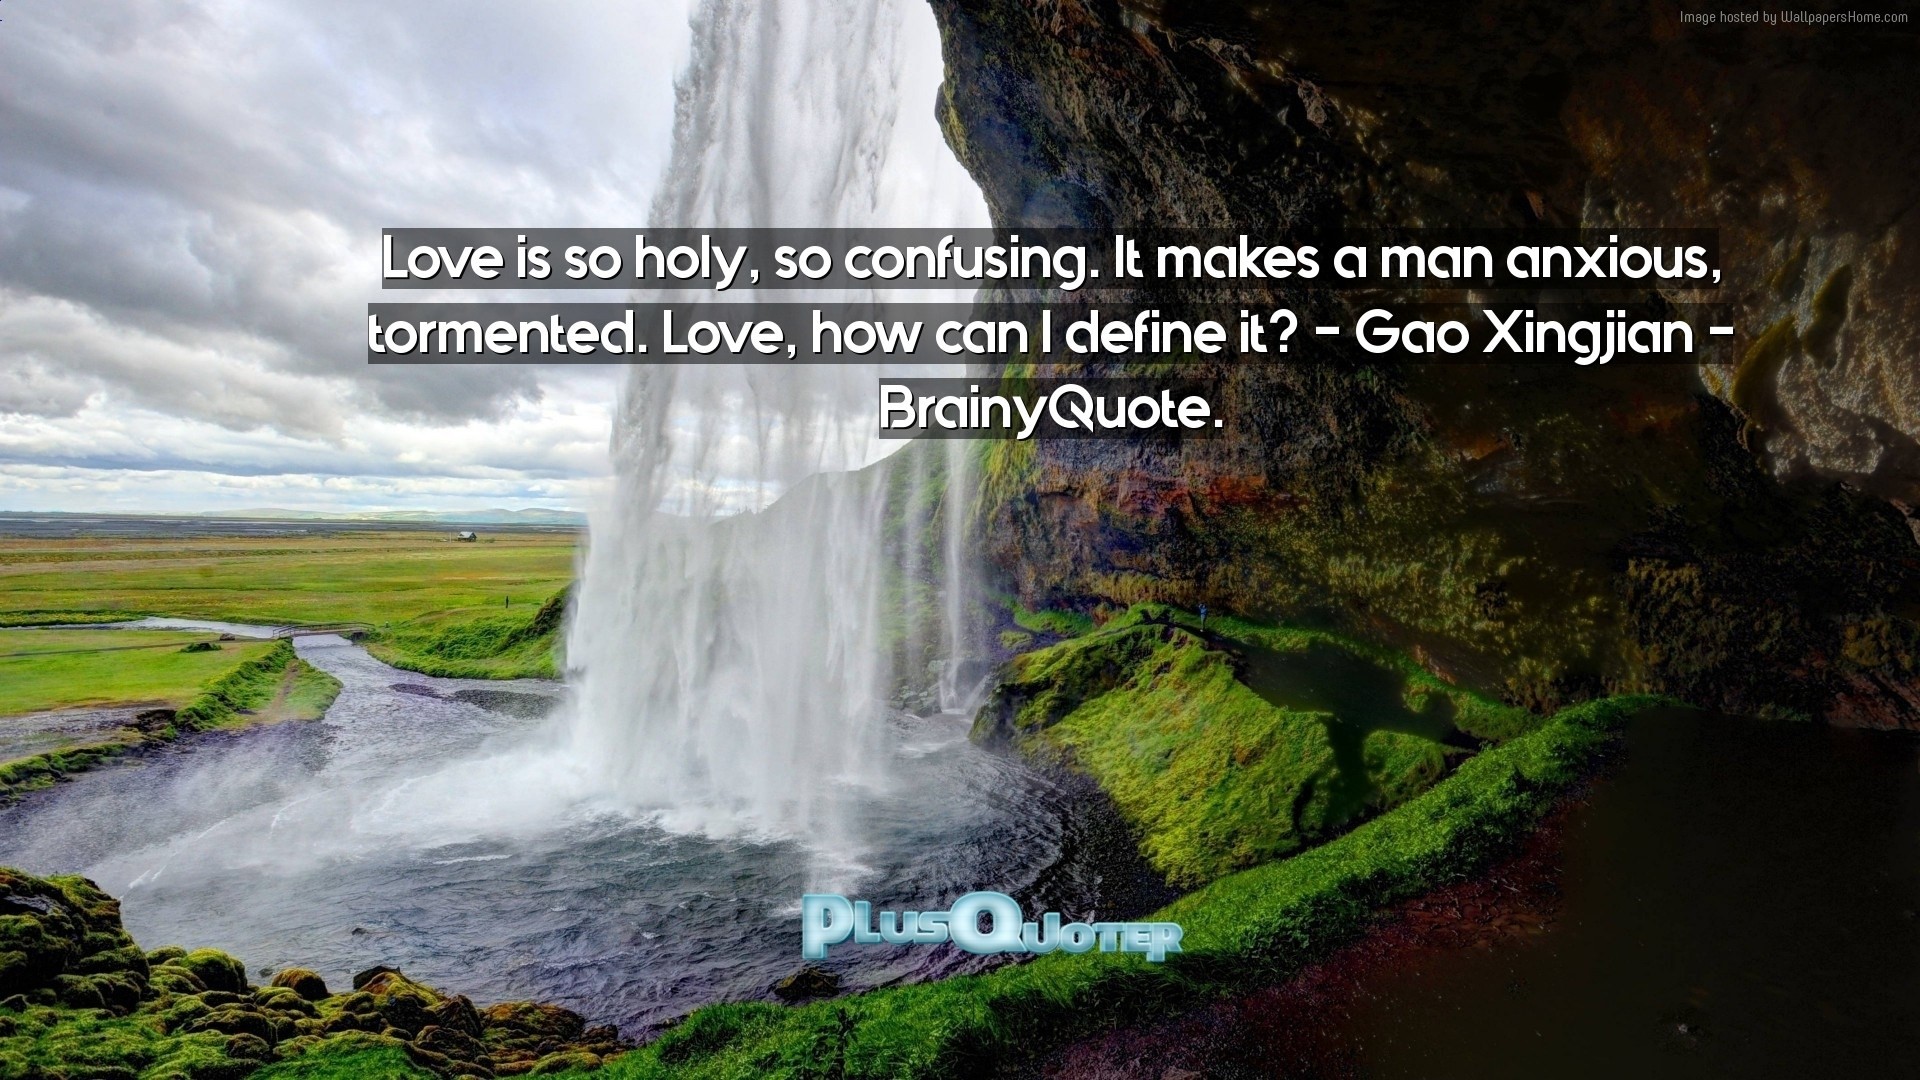 1920x1080 Download Wallpaper with inspirational Quotes- "Love is so holy, so  confusing. It